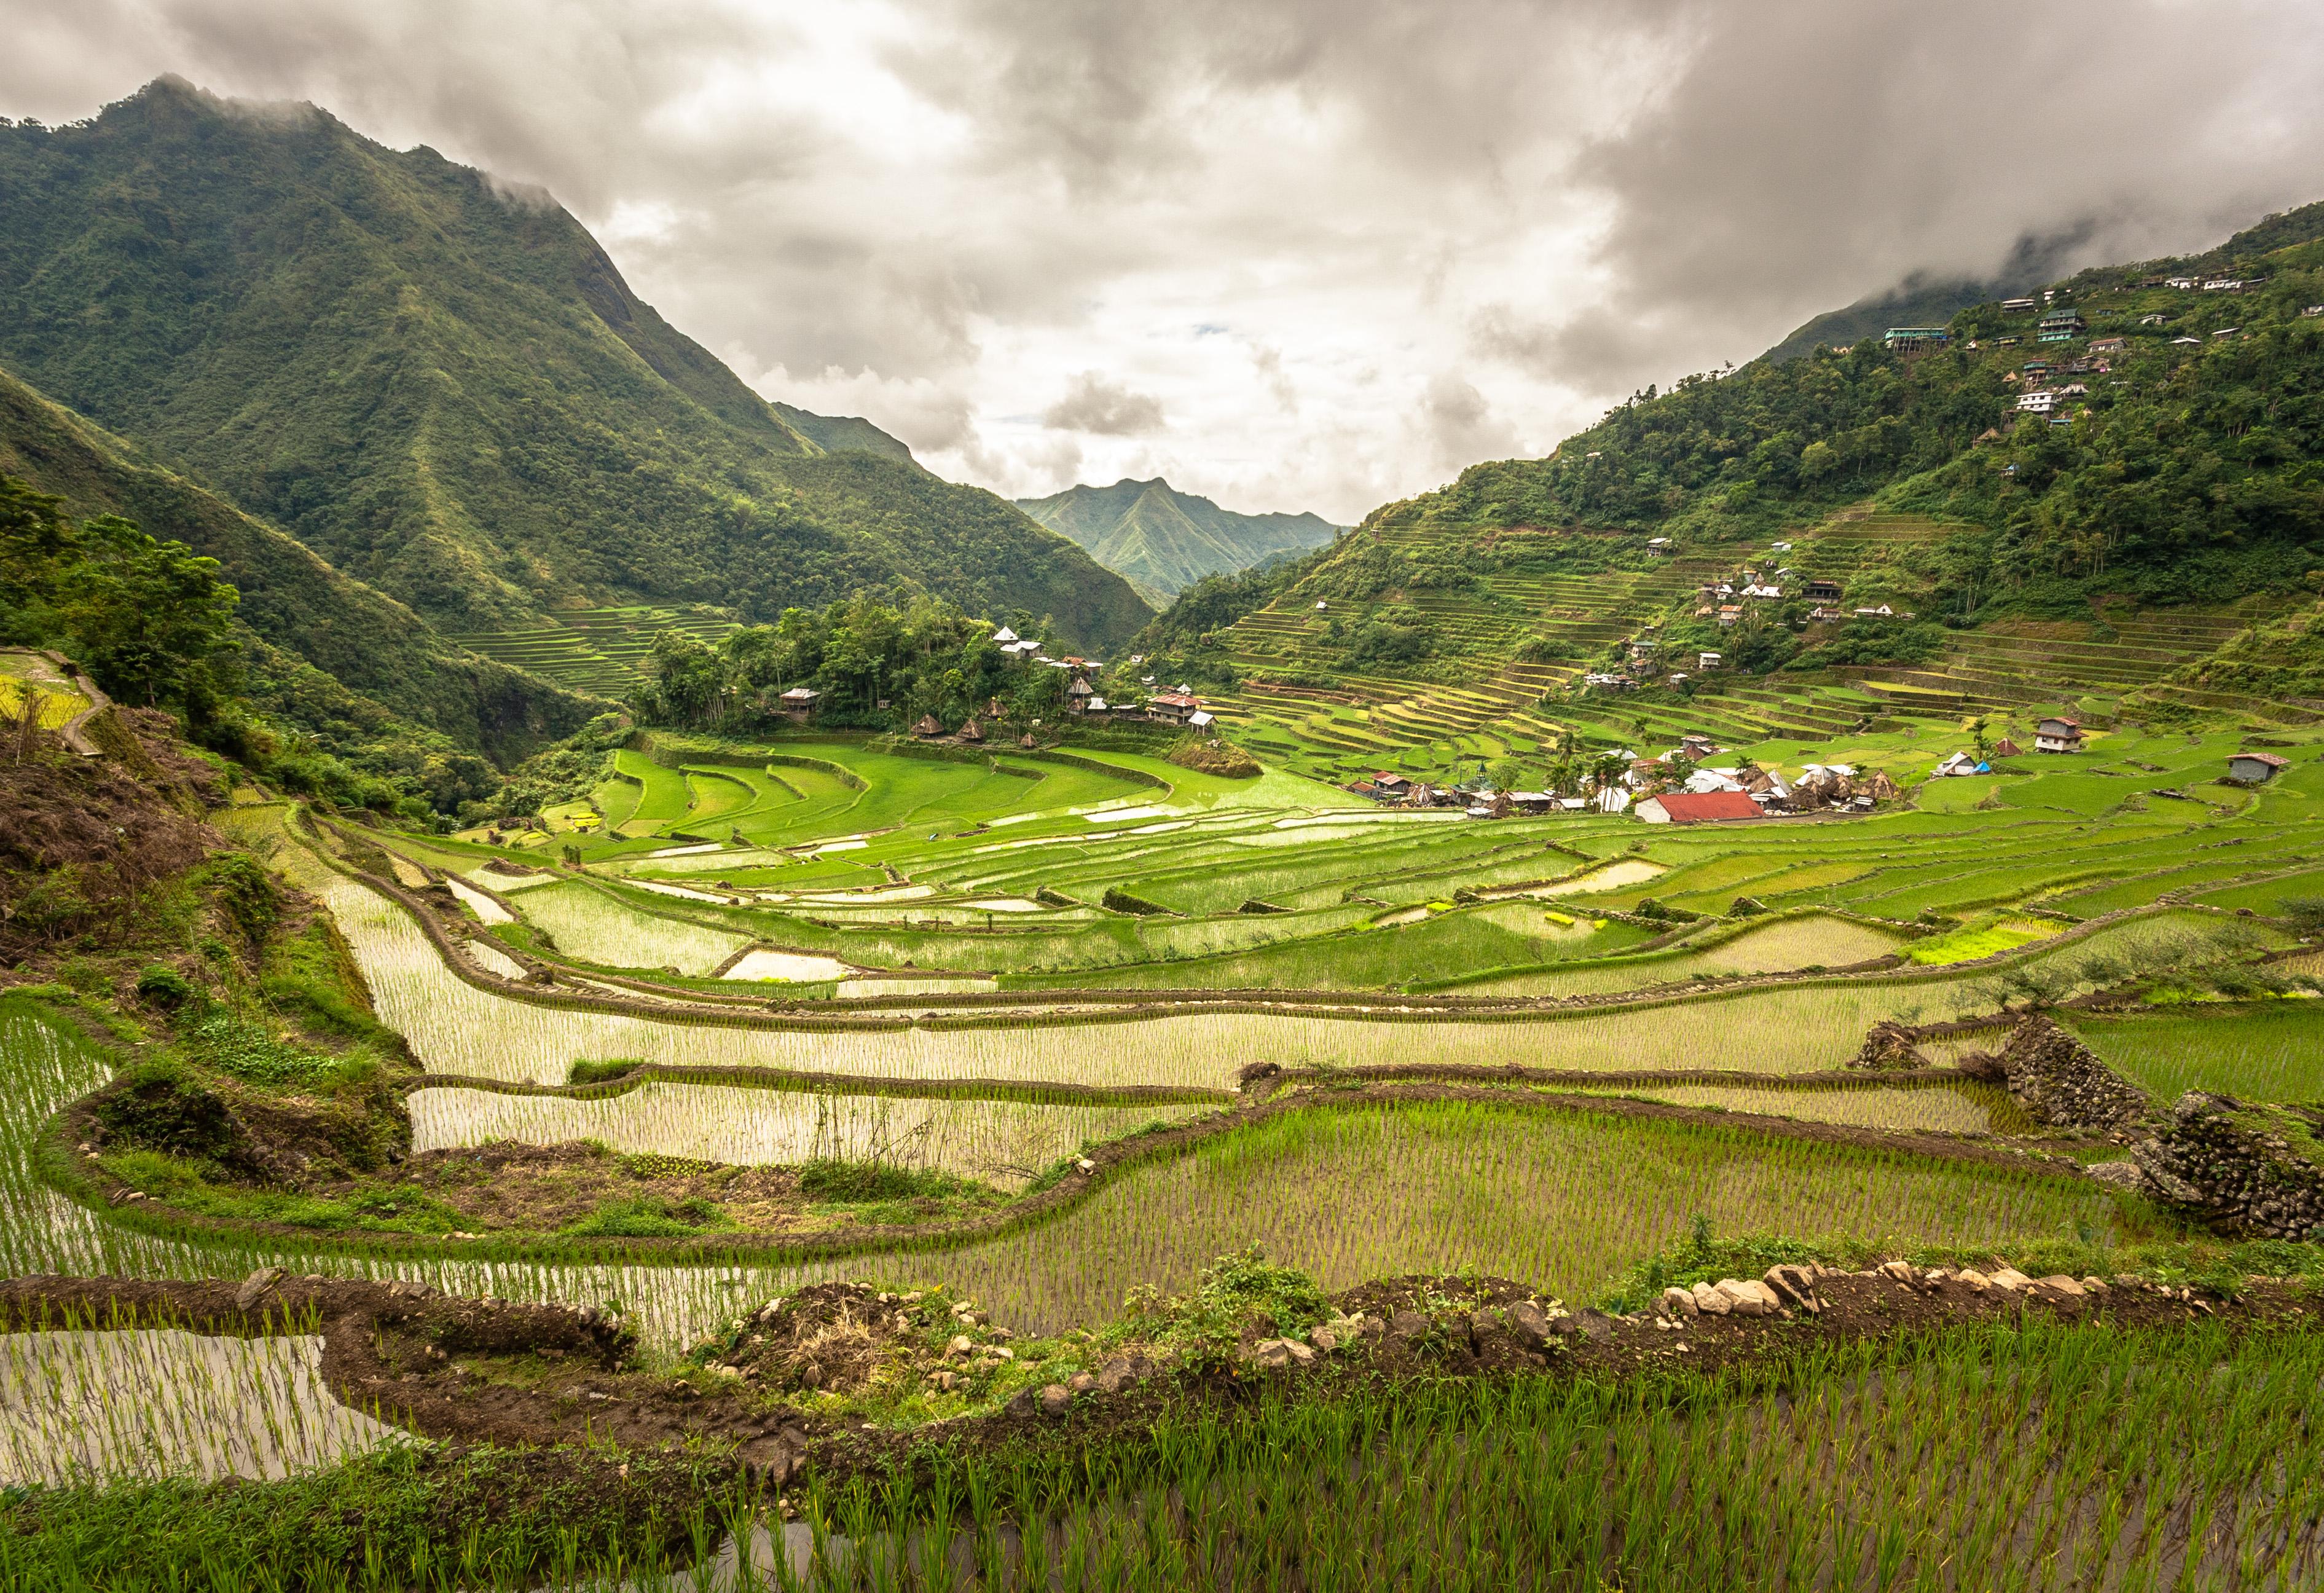 Philippines' Famed Banaue Rice Terraces by Adi Simionov 3782 × 2592